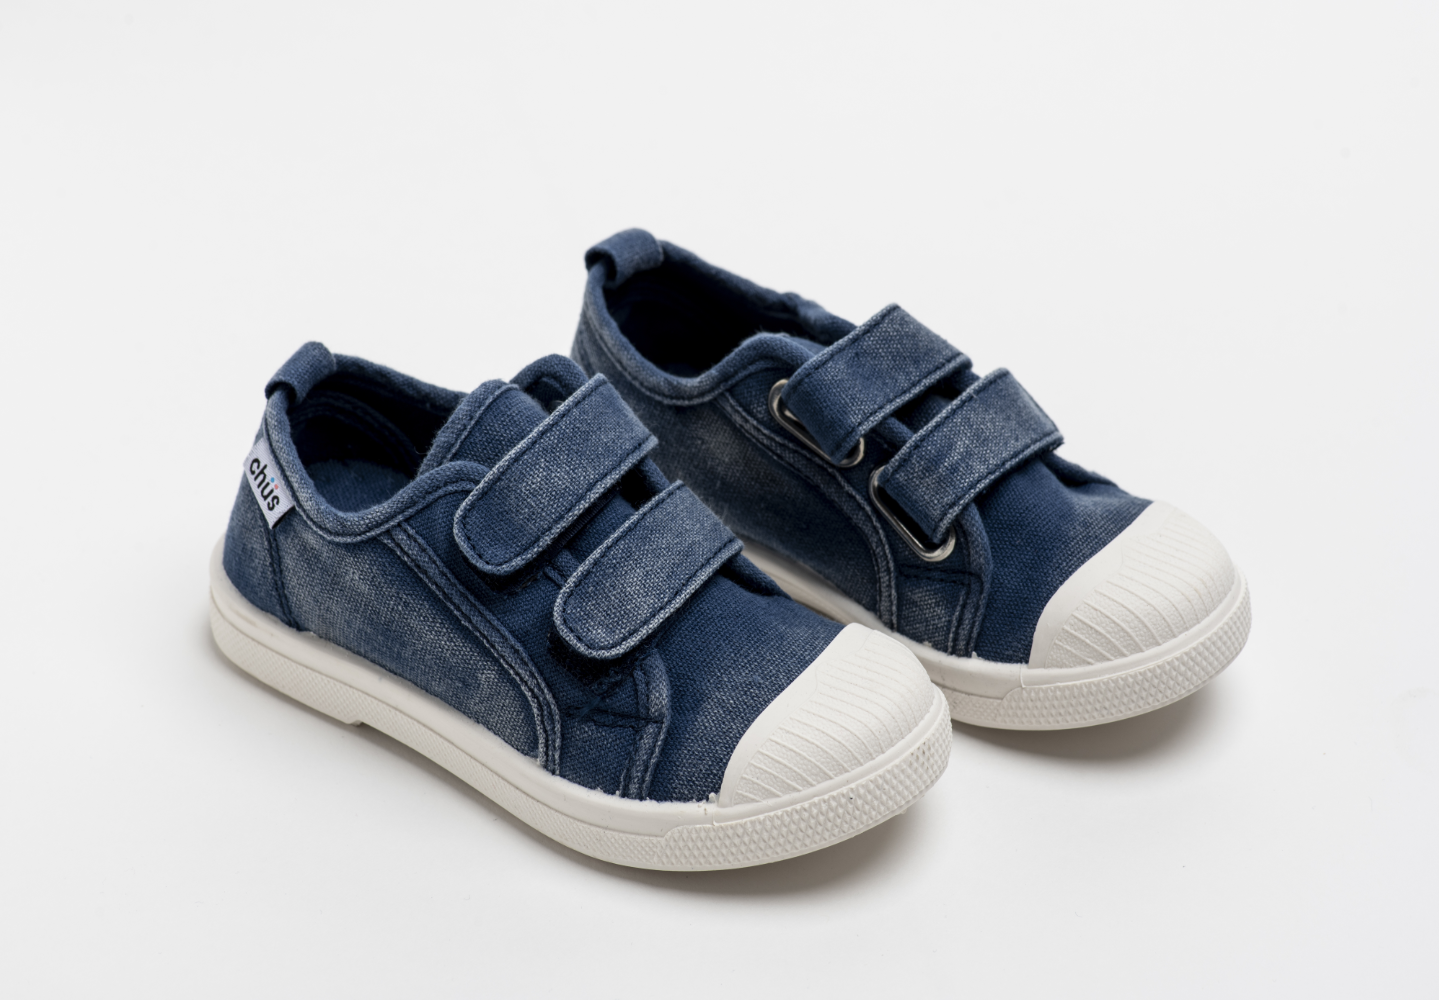 Distressed navy canvas sneakers with double velcro straps. Chus Shoes.